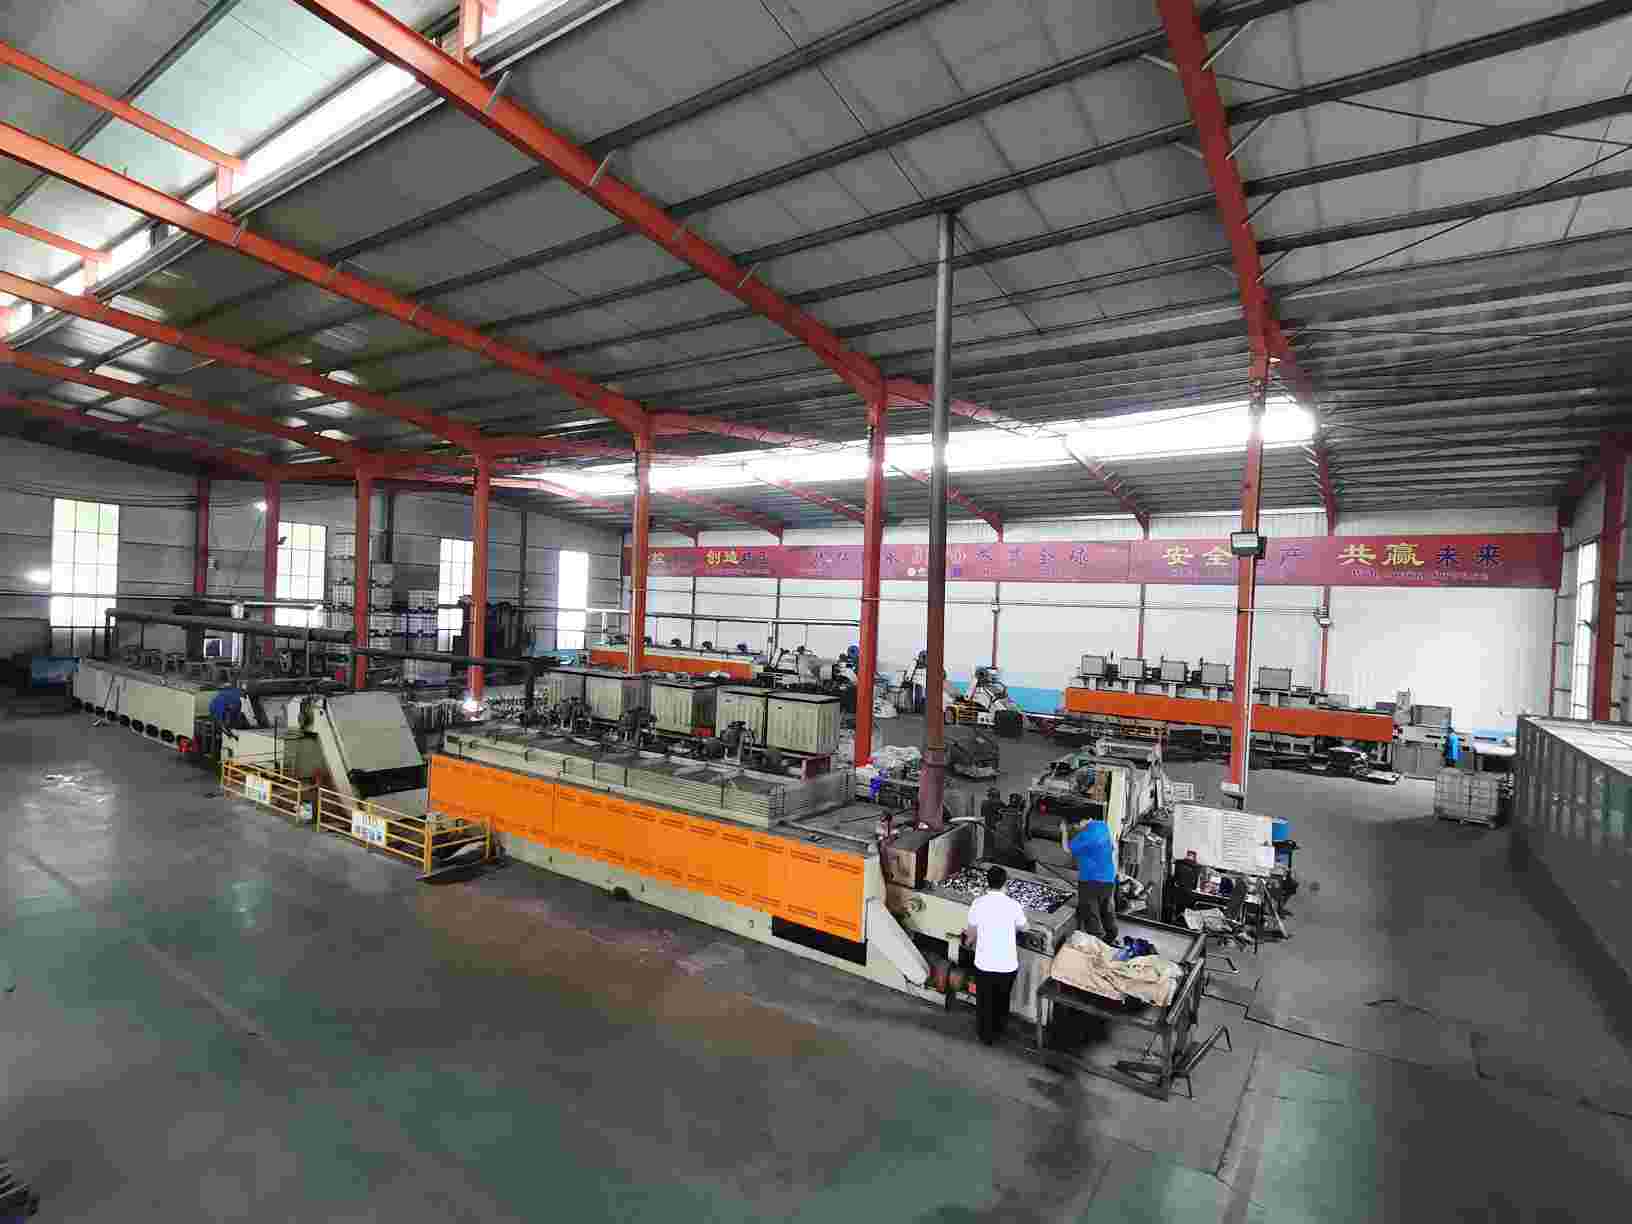 Our factory

